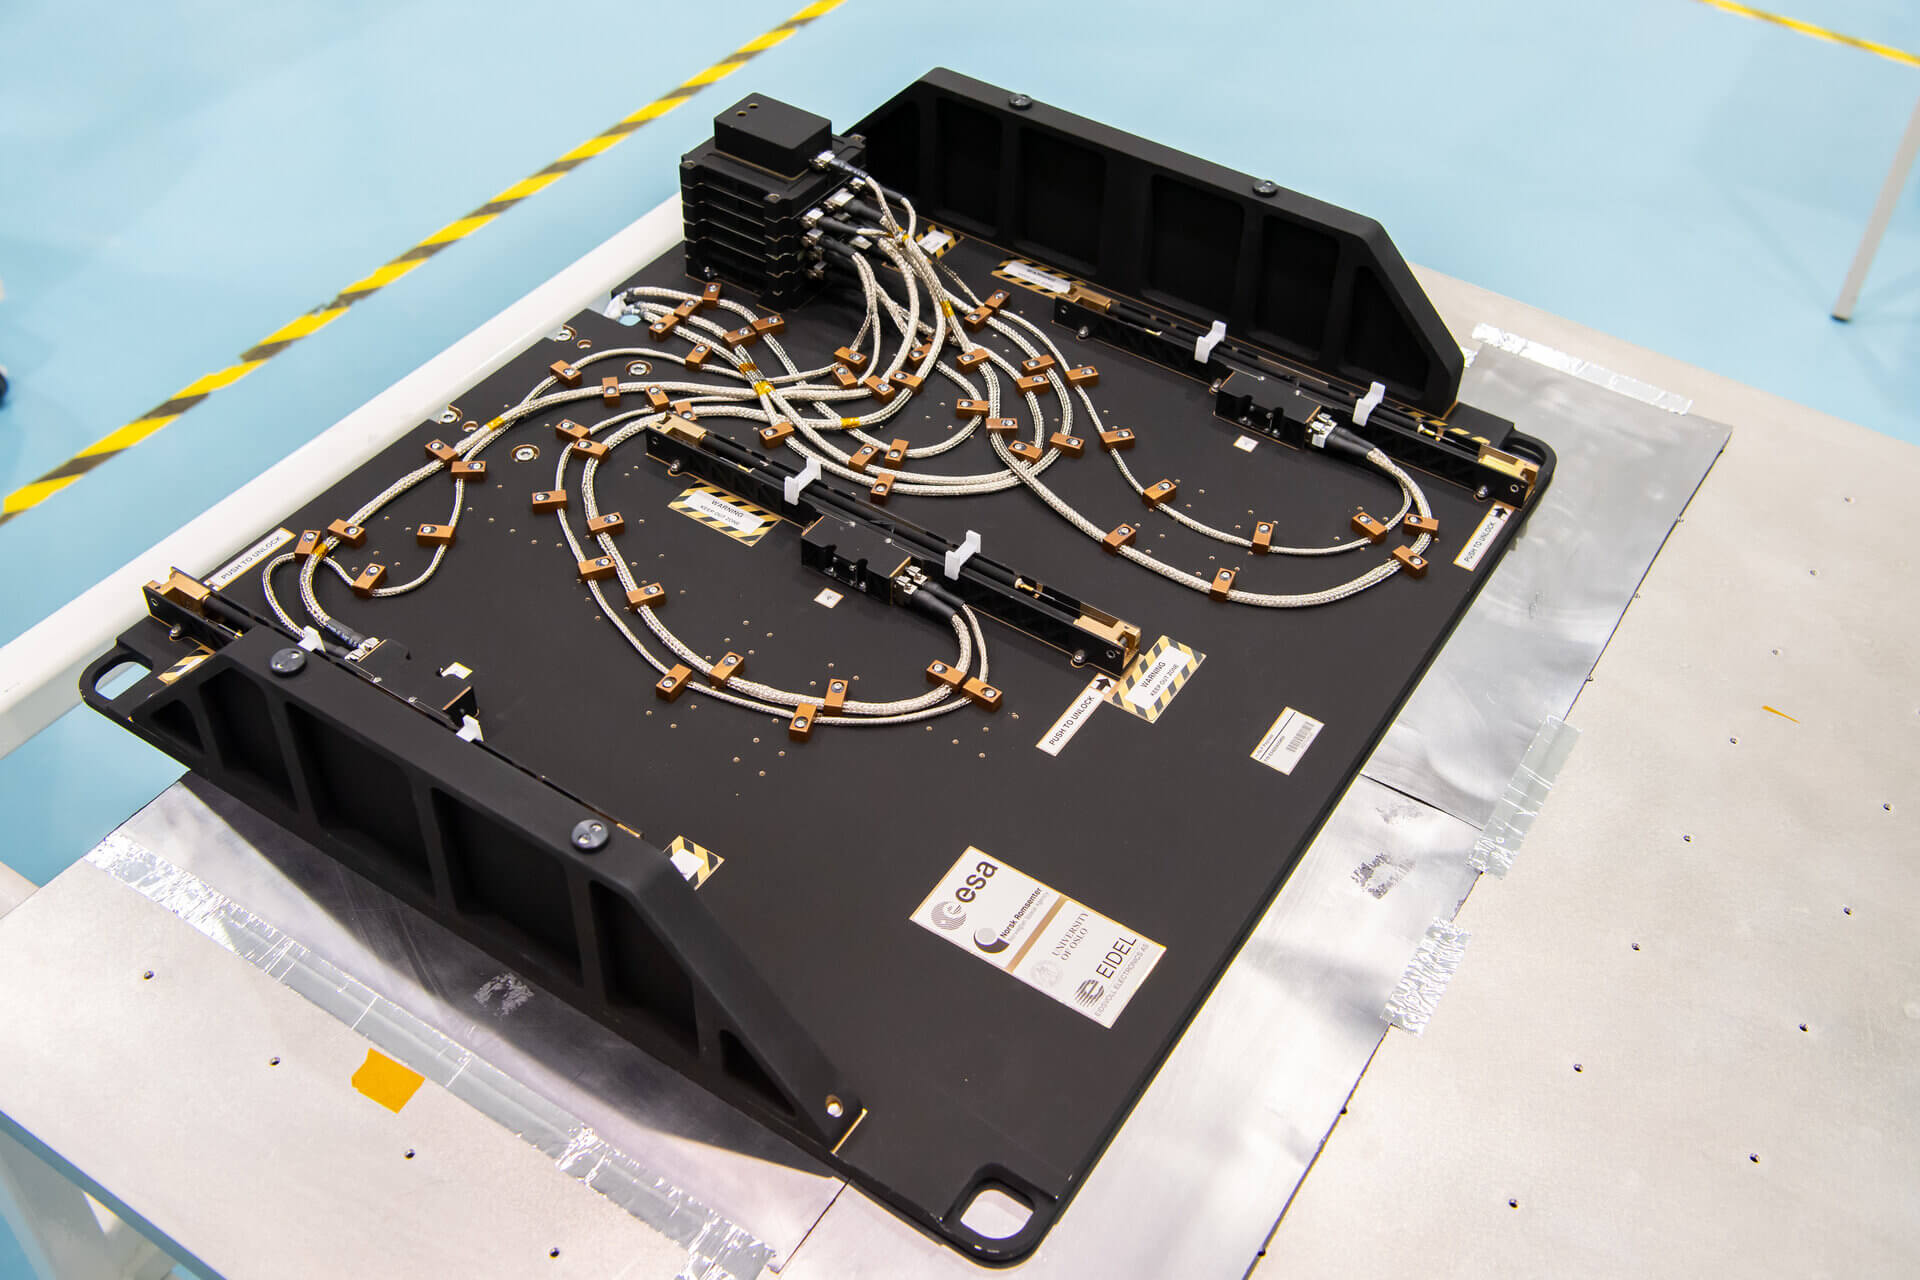 ISS: first commercial payload for Airbus external platform